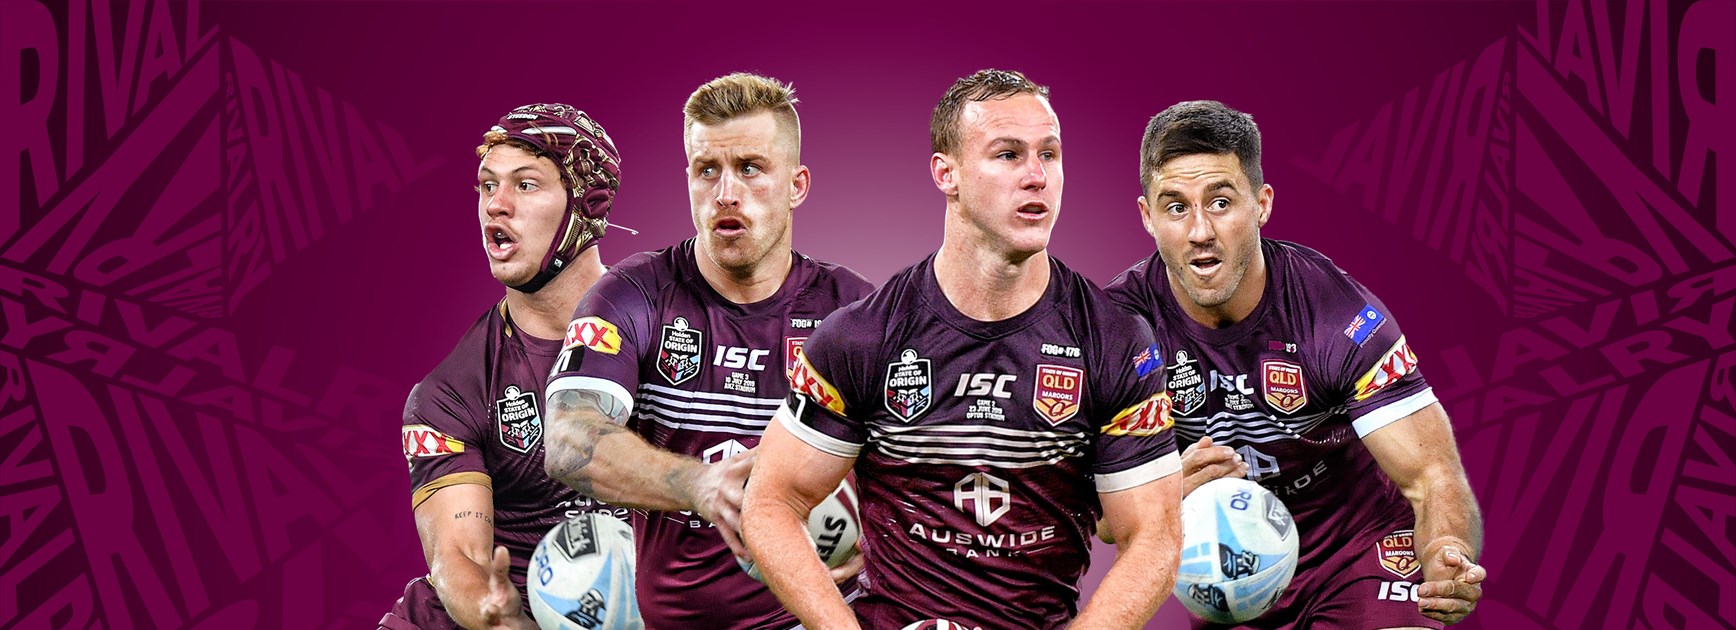 Ranking the Maroons spine candidates for 2020 Origin